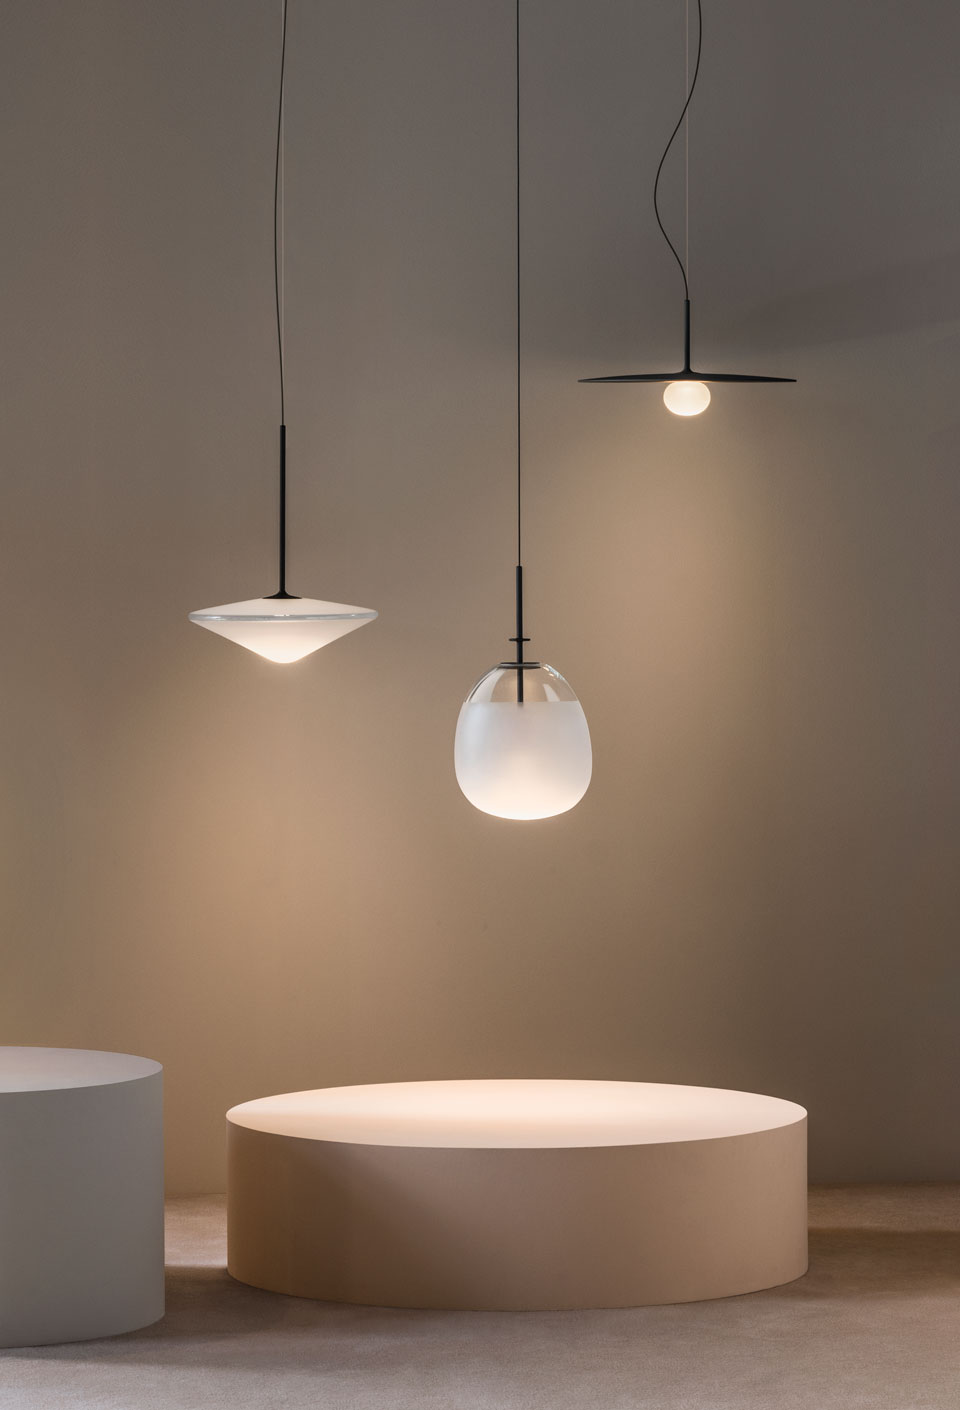 Vibia-Stories-The Tempo Collection: Archetypal Lighting, Reinterpreted